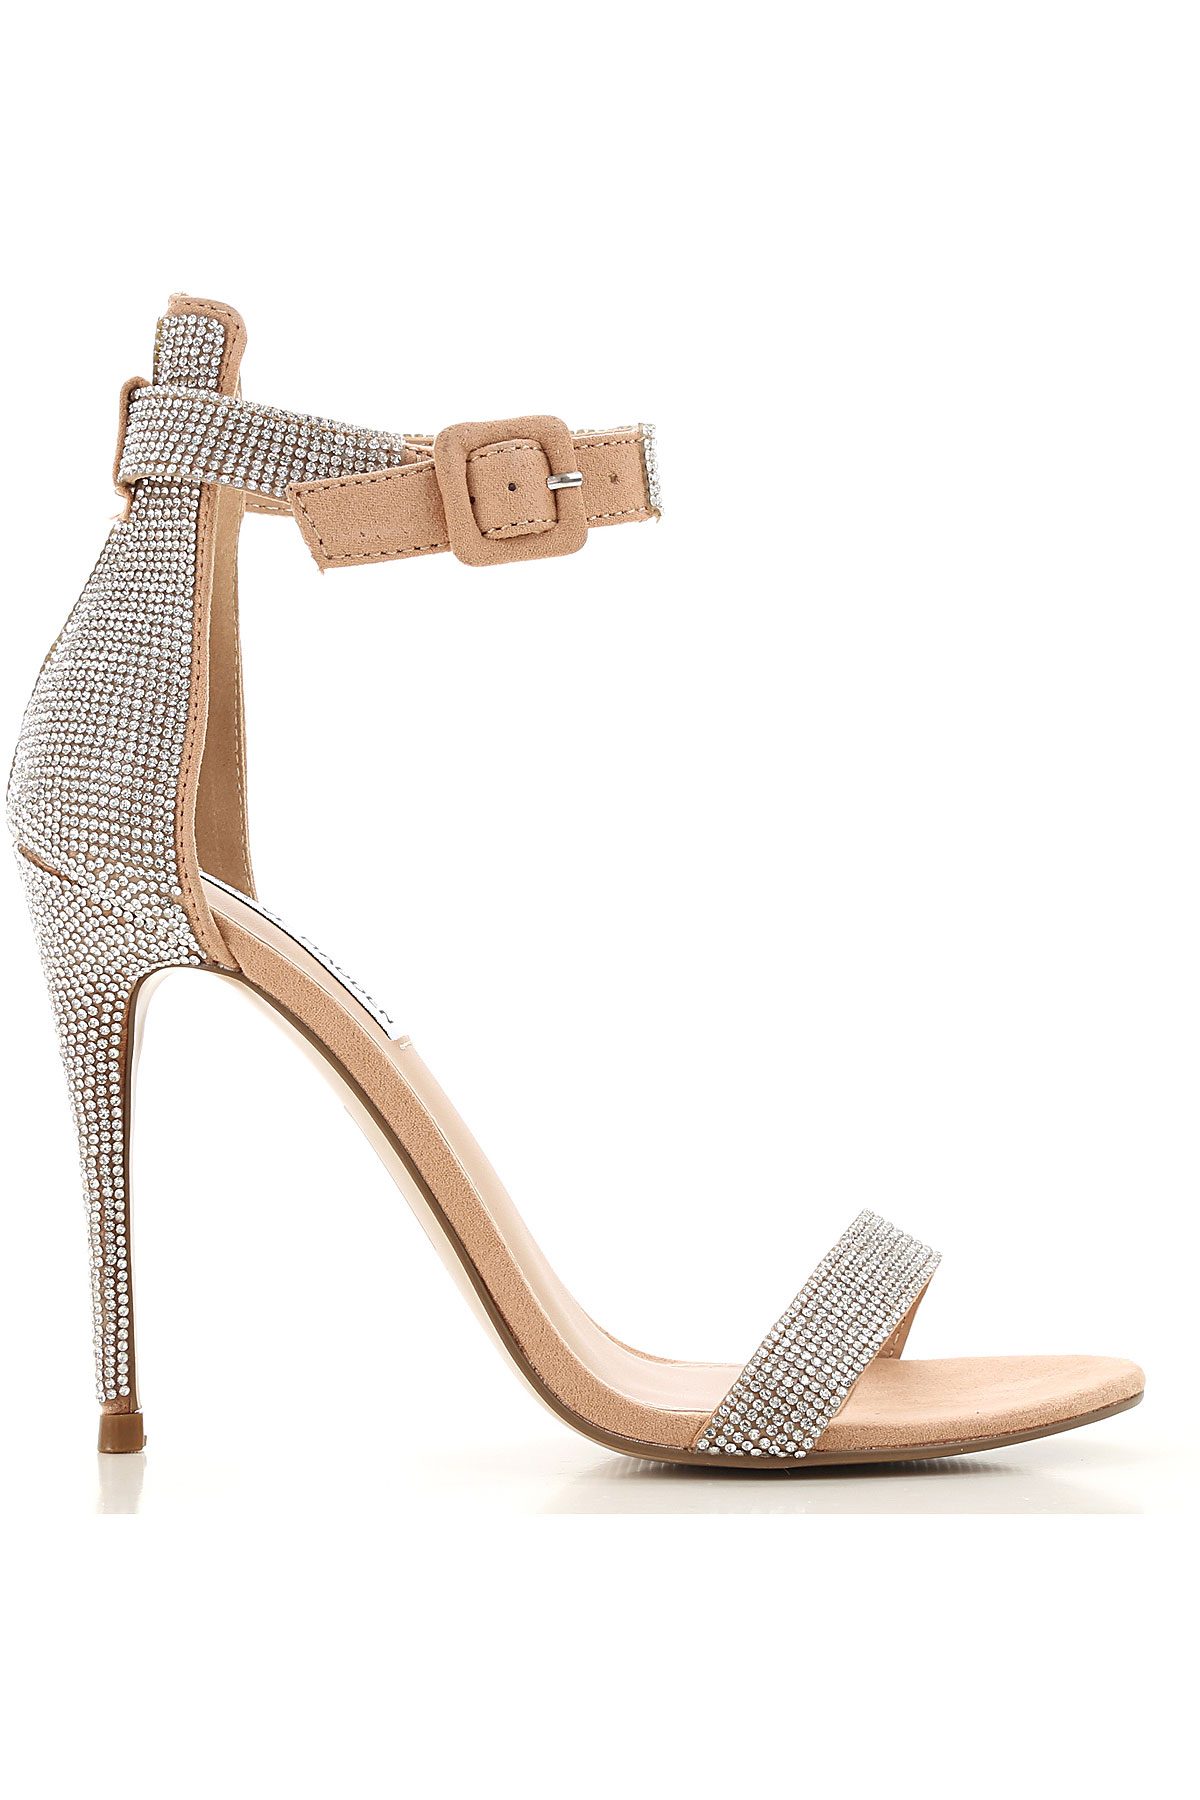 Womens Shoes Steve Madden, Style code 